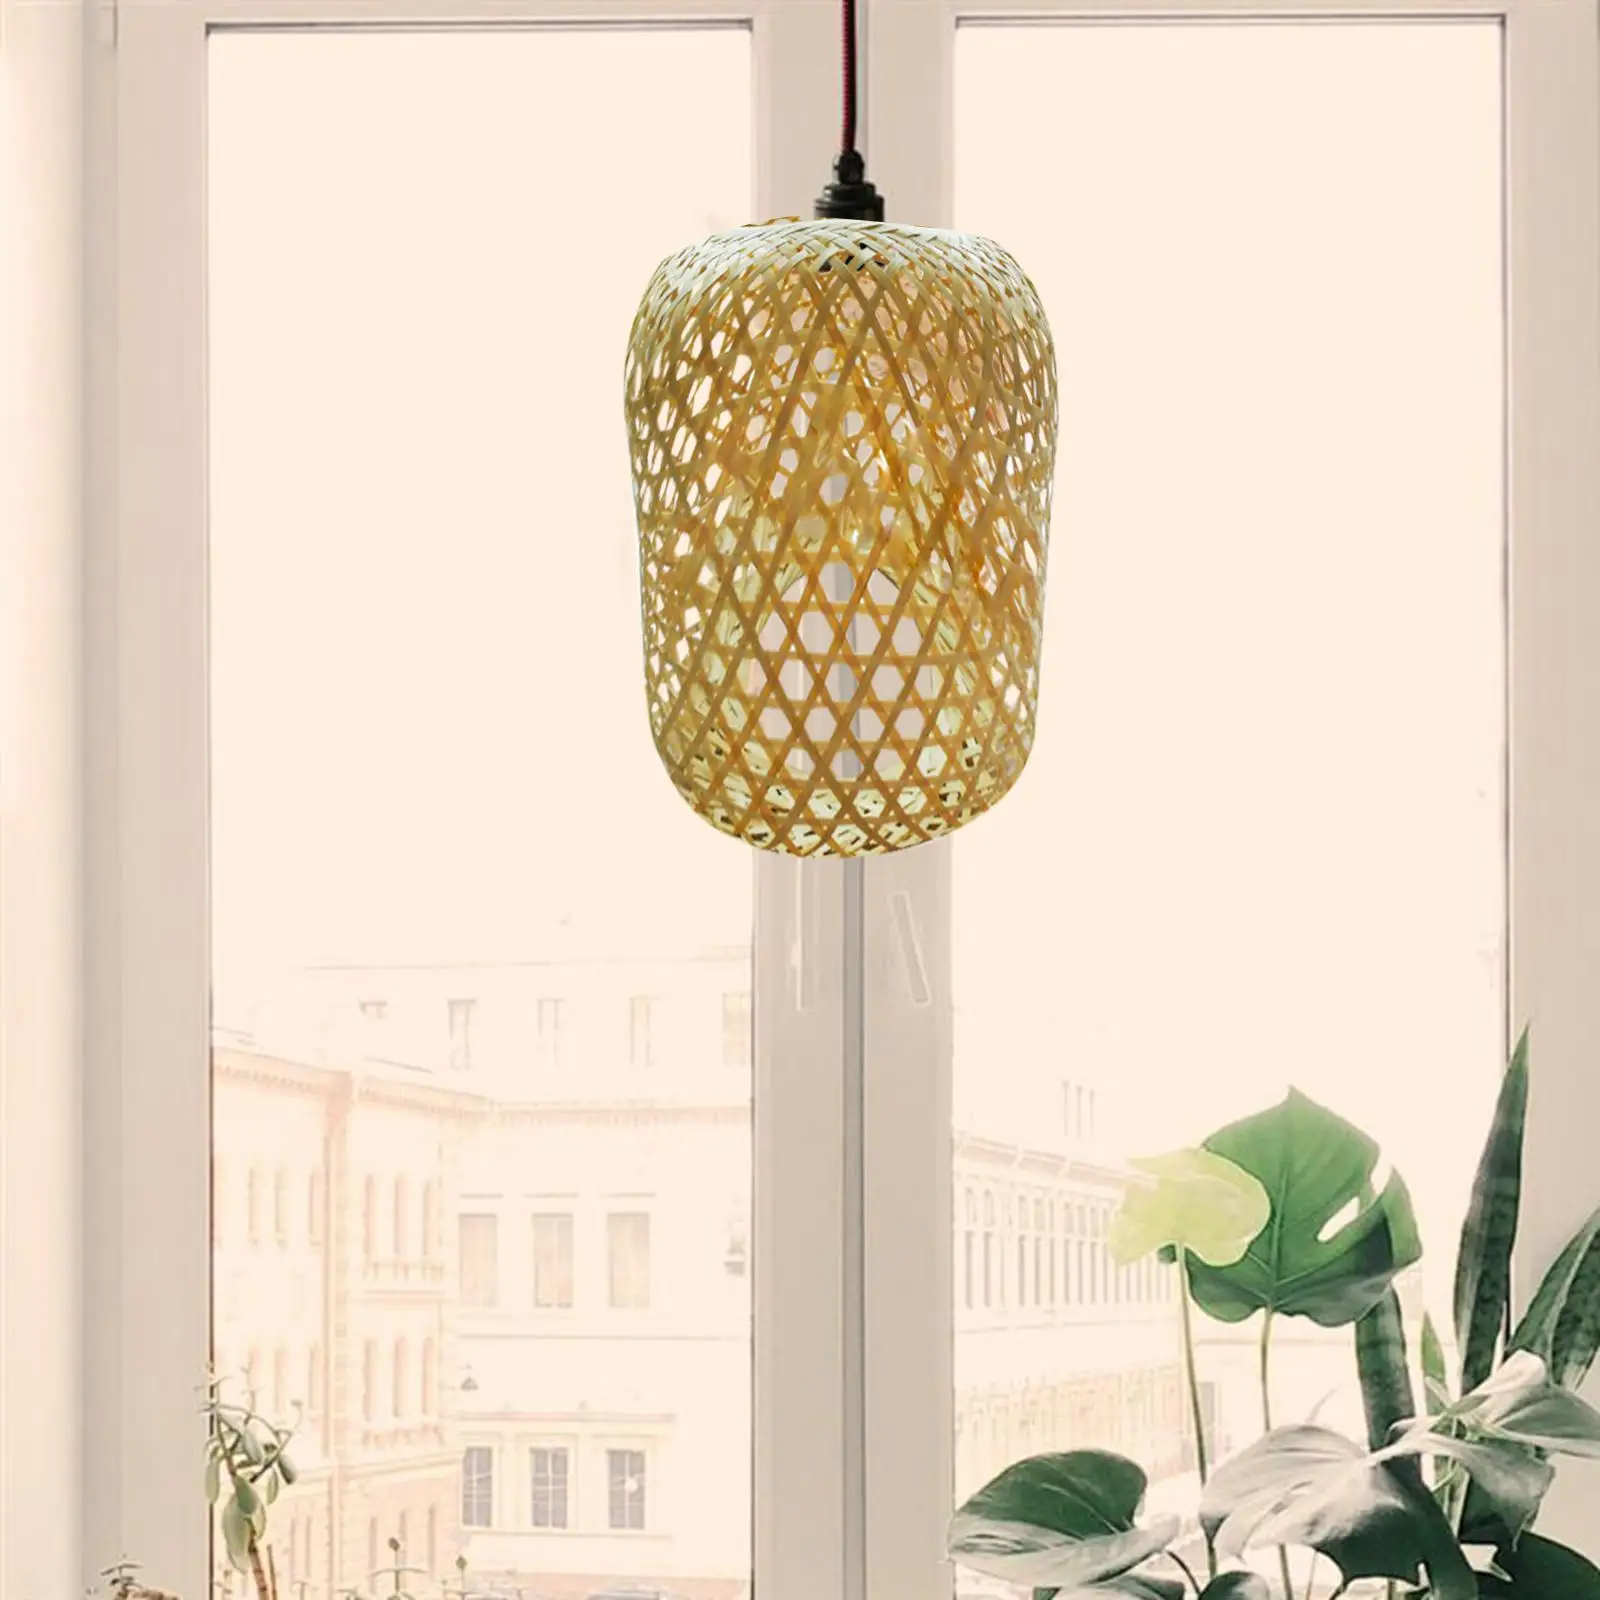 Bamboo Lamp Shade, Pendant Light Cover Art Crafts Lamp Accessory for Kitchen Decor